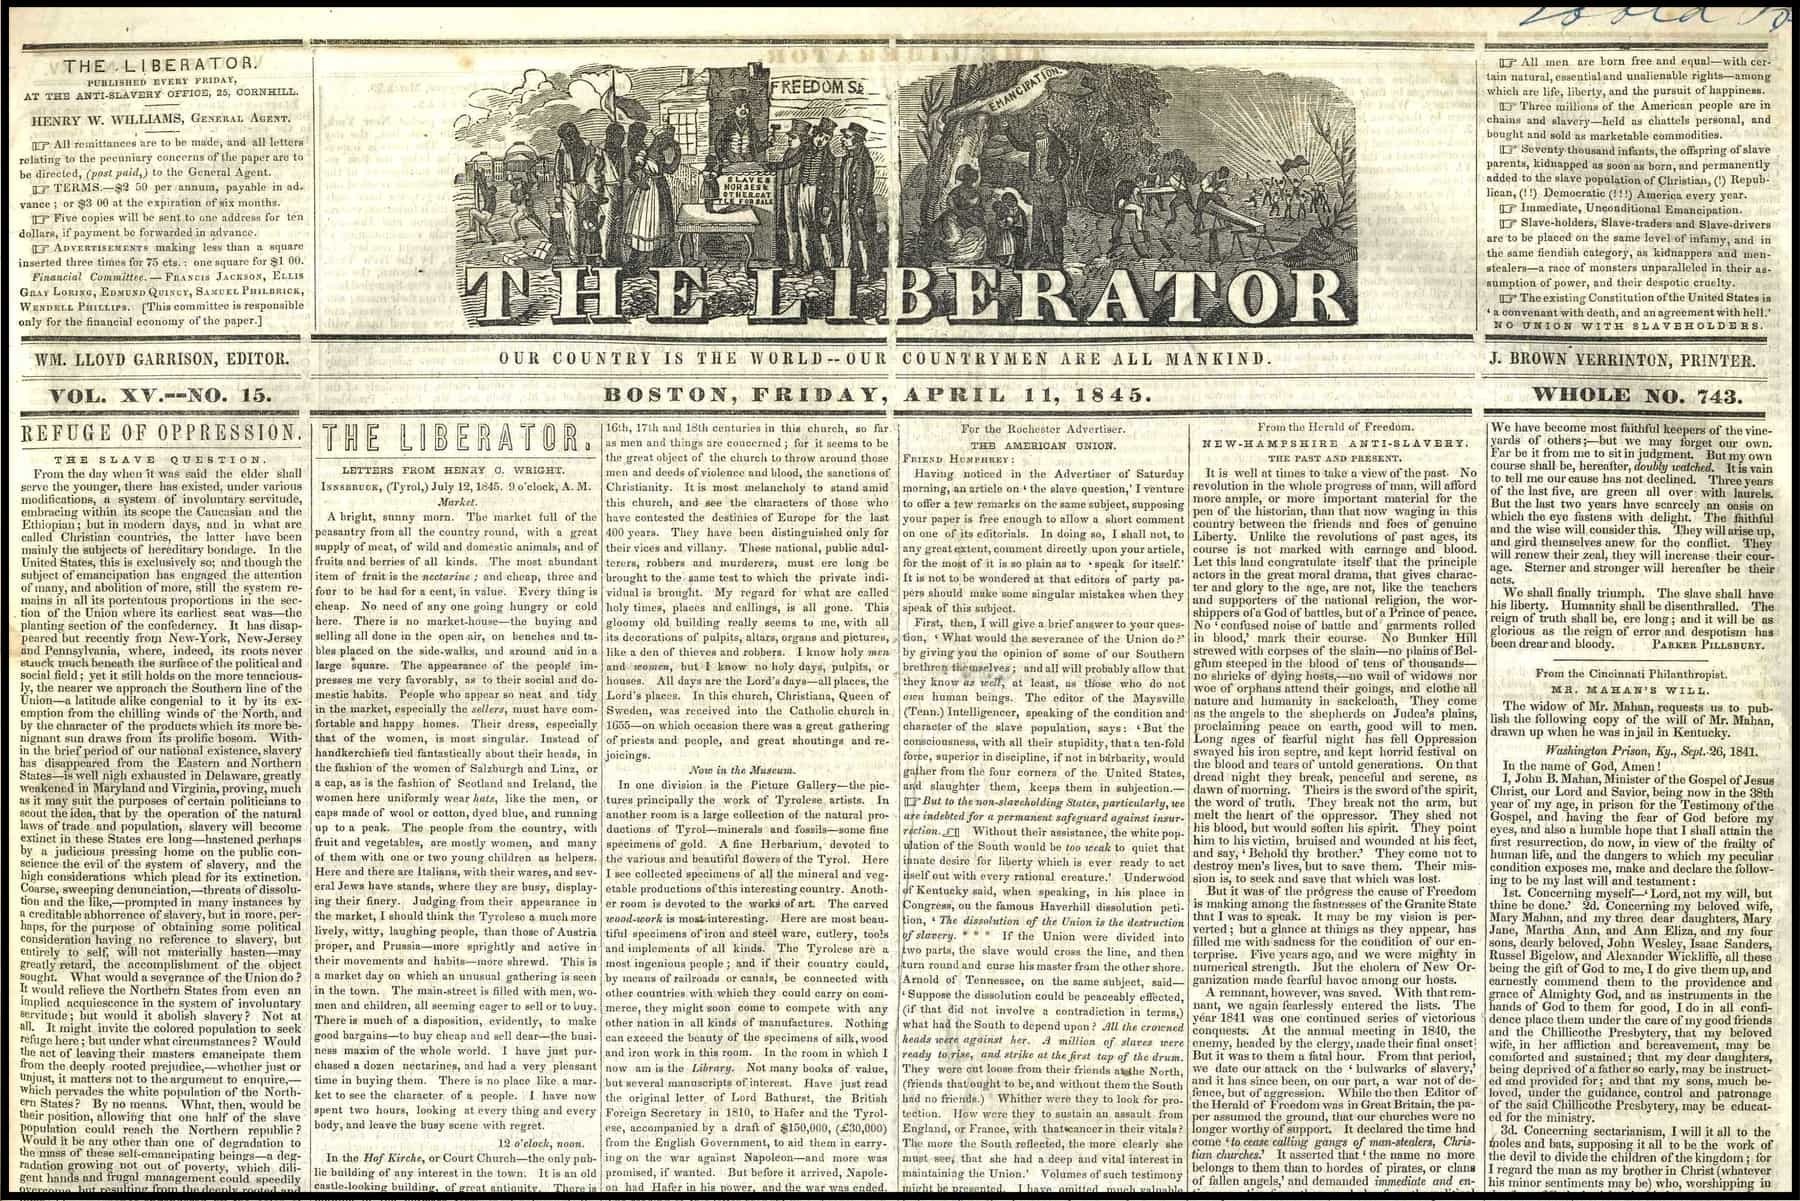 Front page of the Liberator.